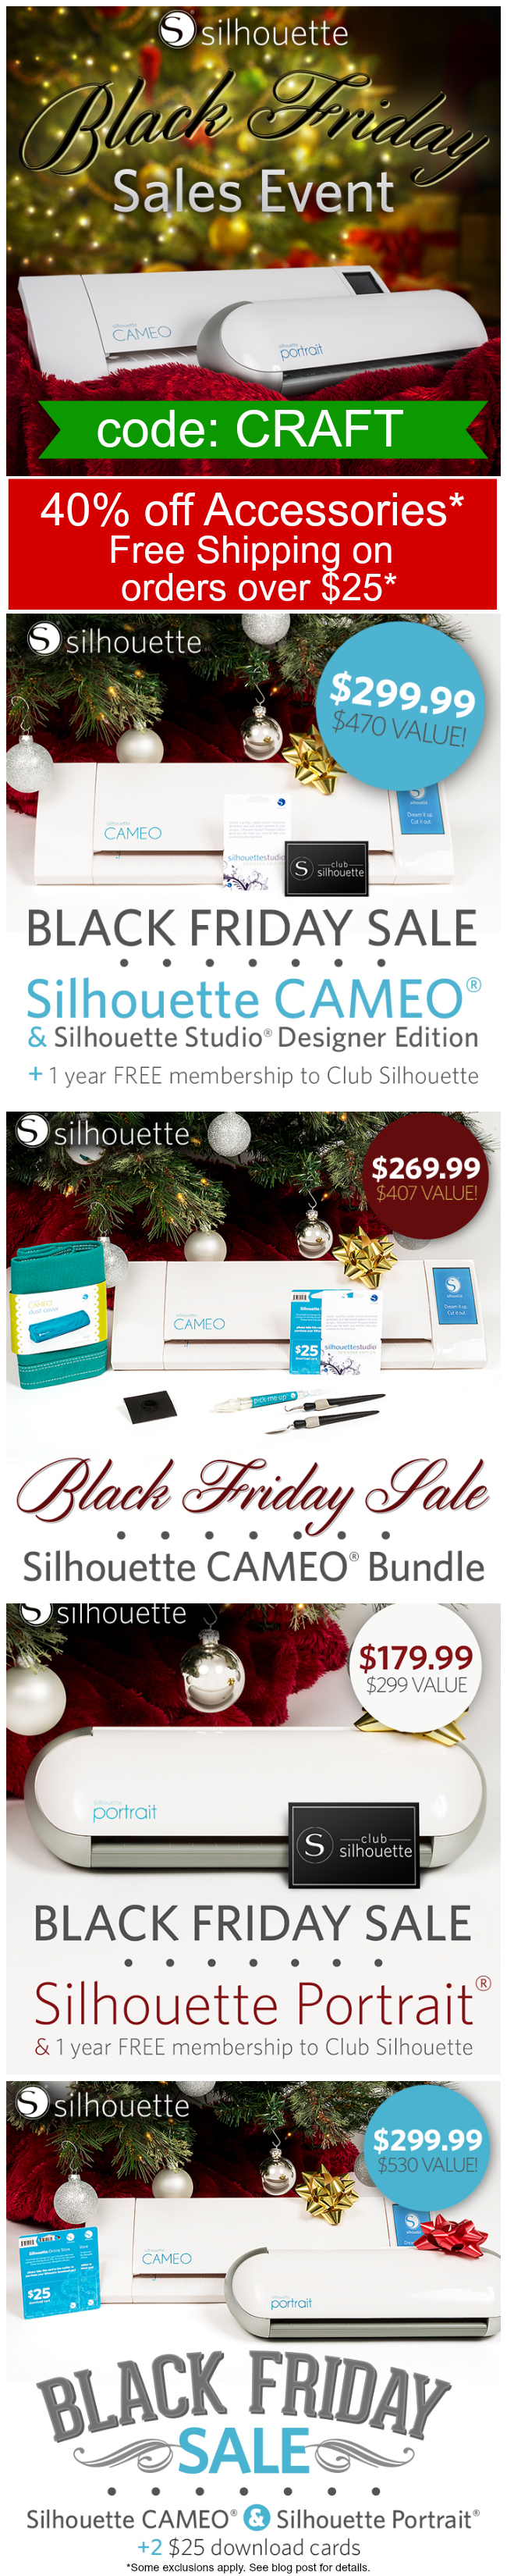 All of Silhouette Black Friday Deals all in one place. Lots of great deals!!